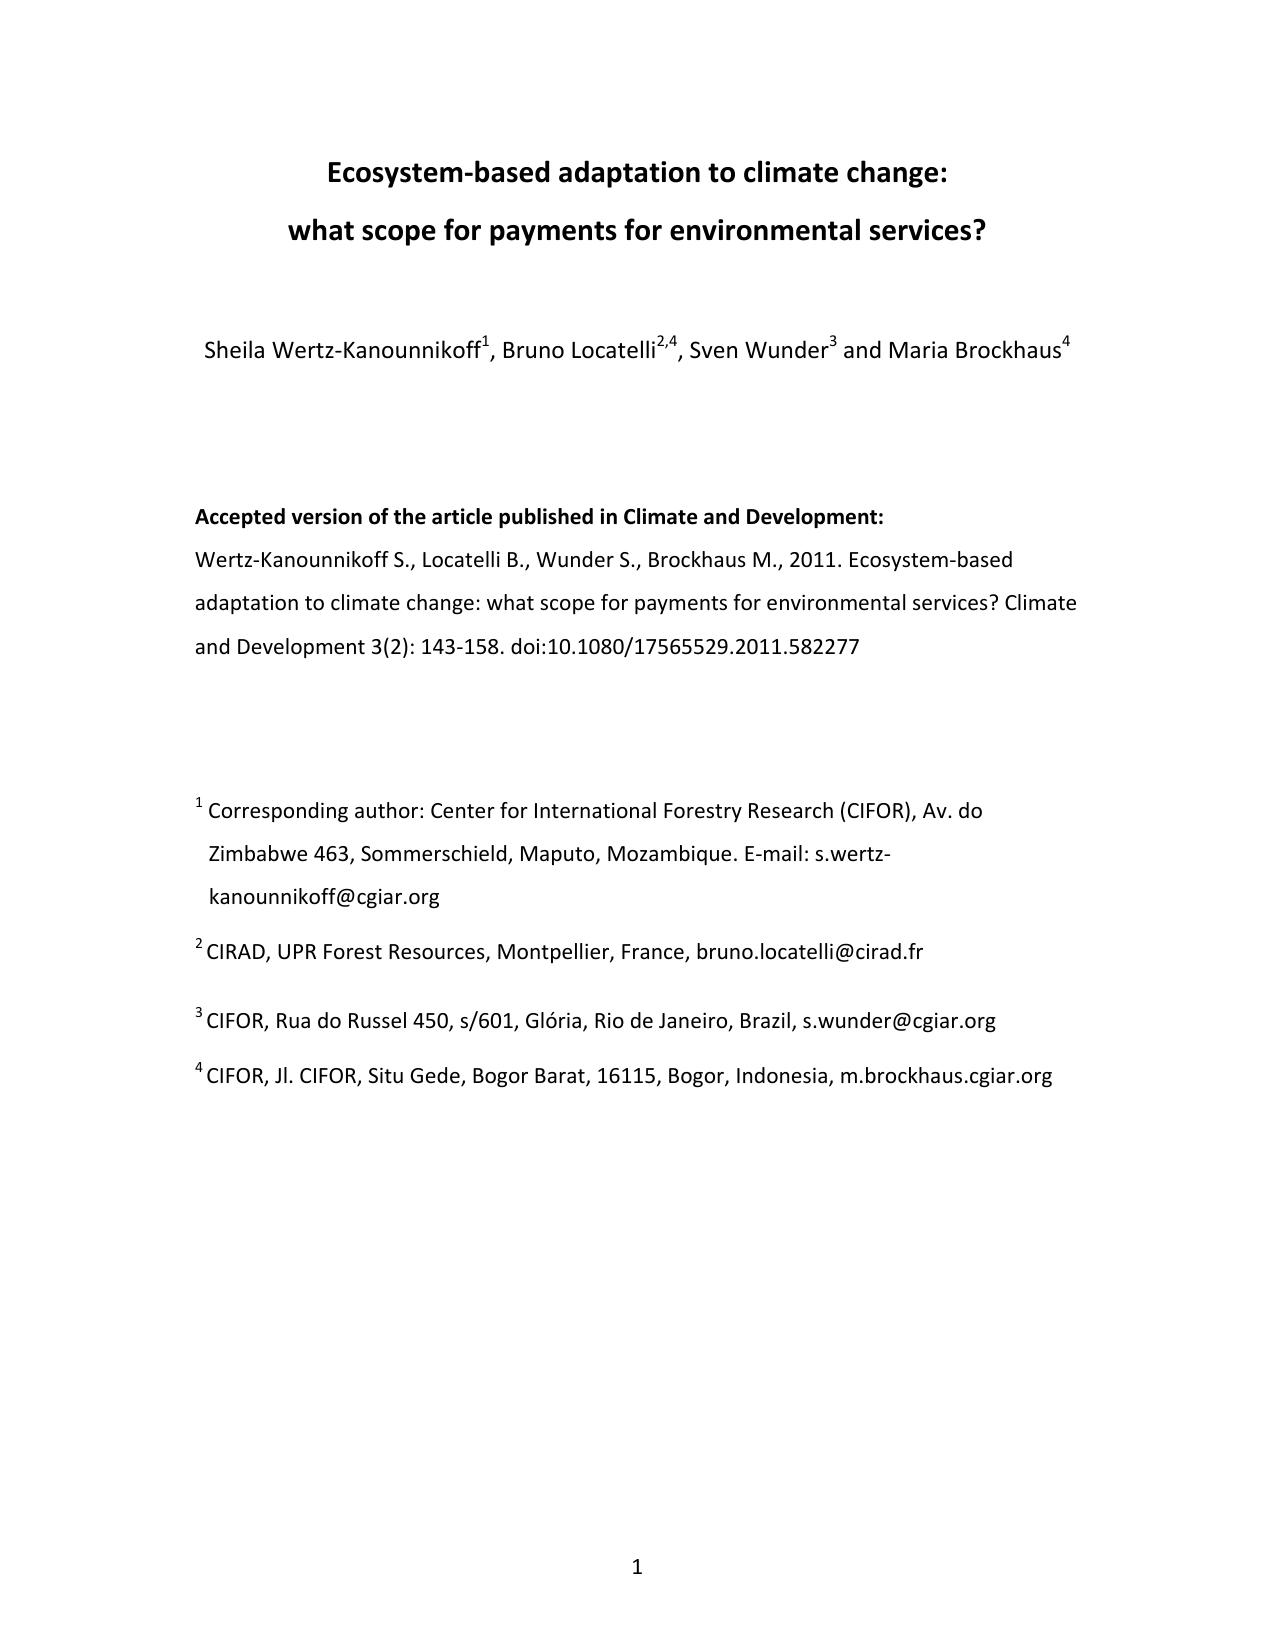 Ecosystem-based adaptation to climate change: what scope for payments for environmental services?